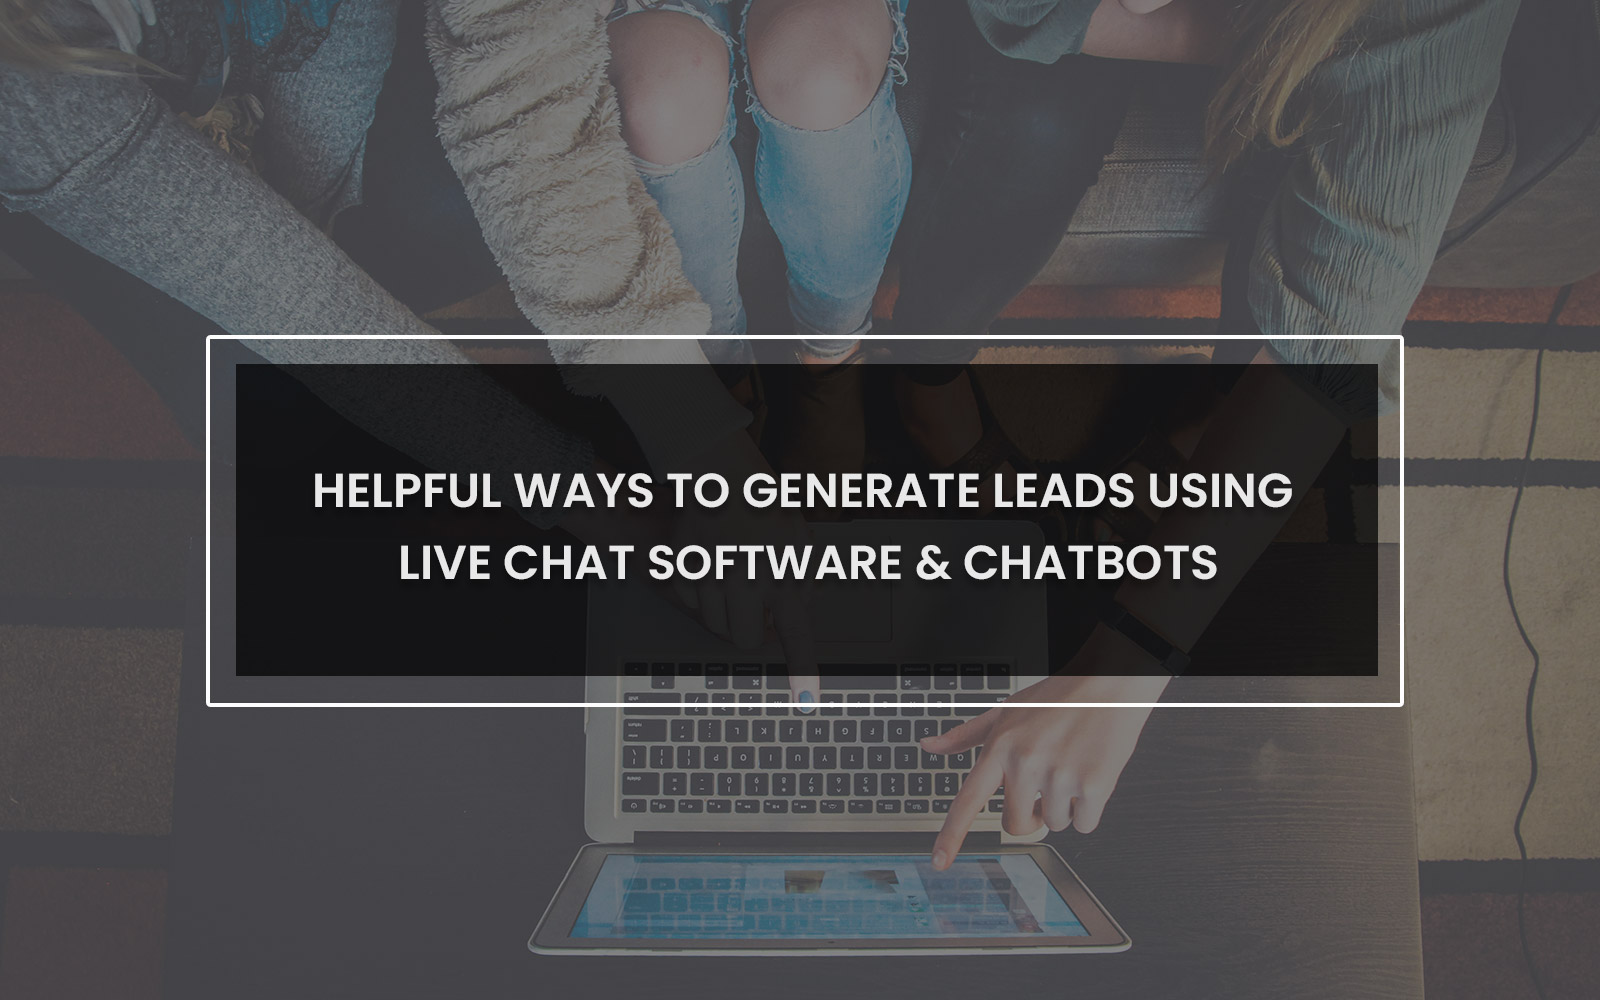 Helpful Ways to Generate Leads Using Live Chat Software & Chatbots